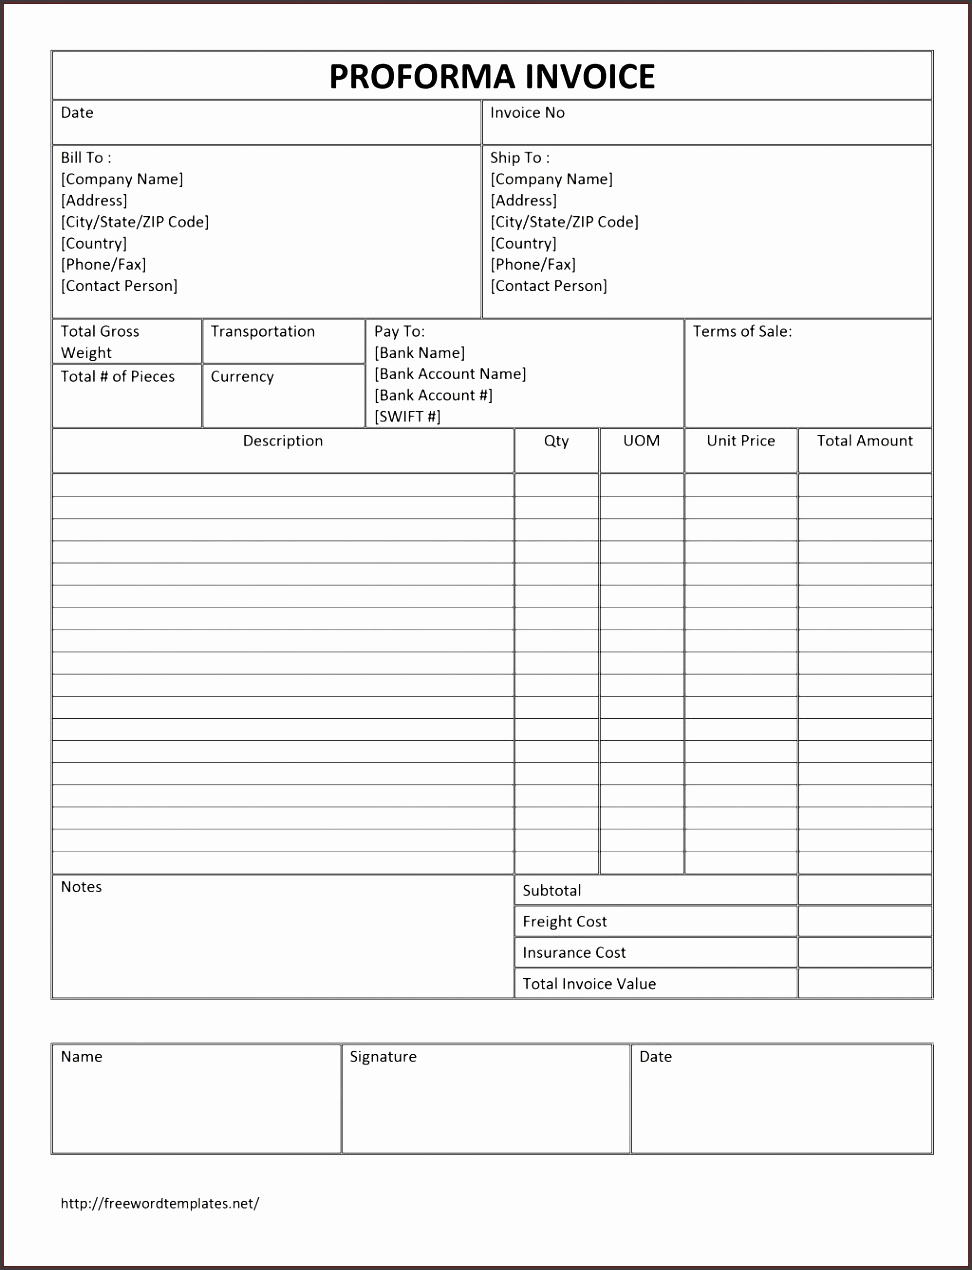 Free towing Invoice Template New 10 Proforma Invoice Sample for Free Sampletemplatess